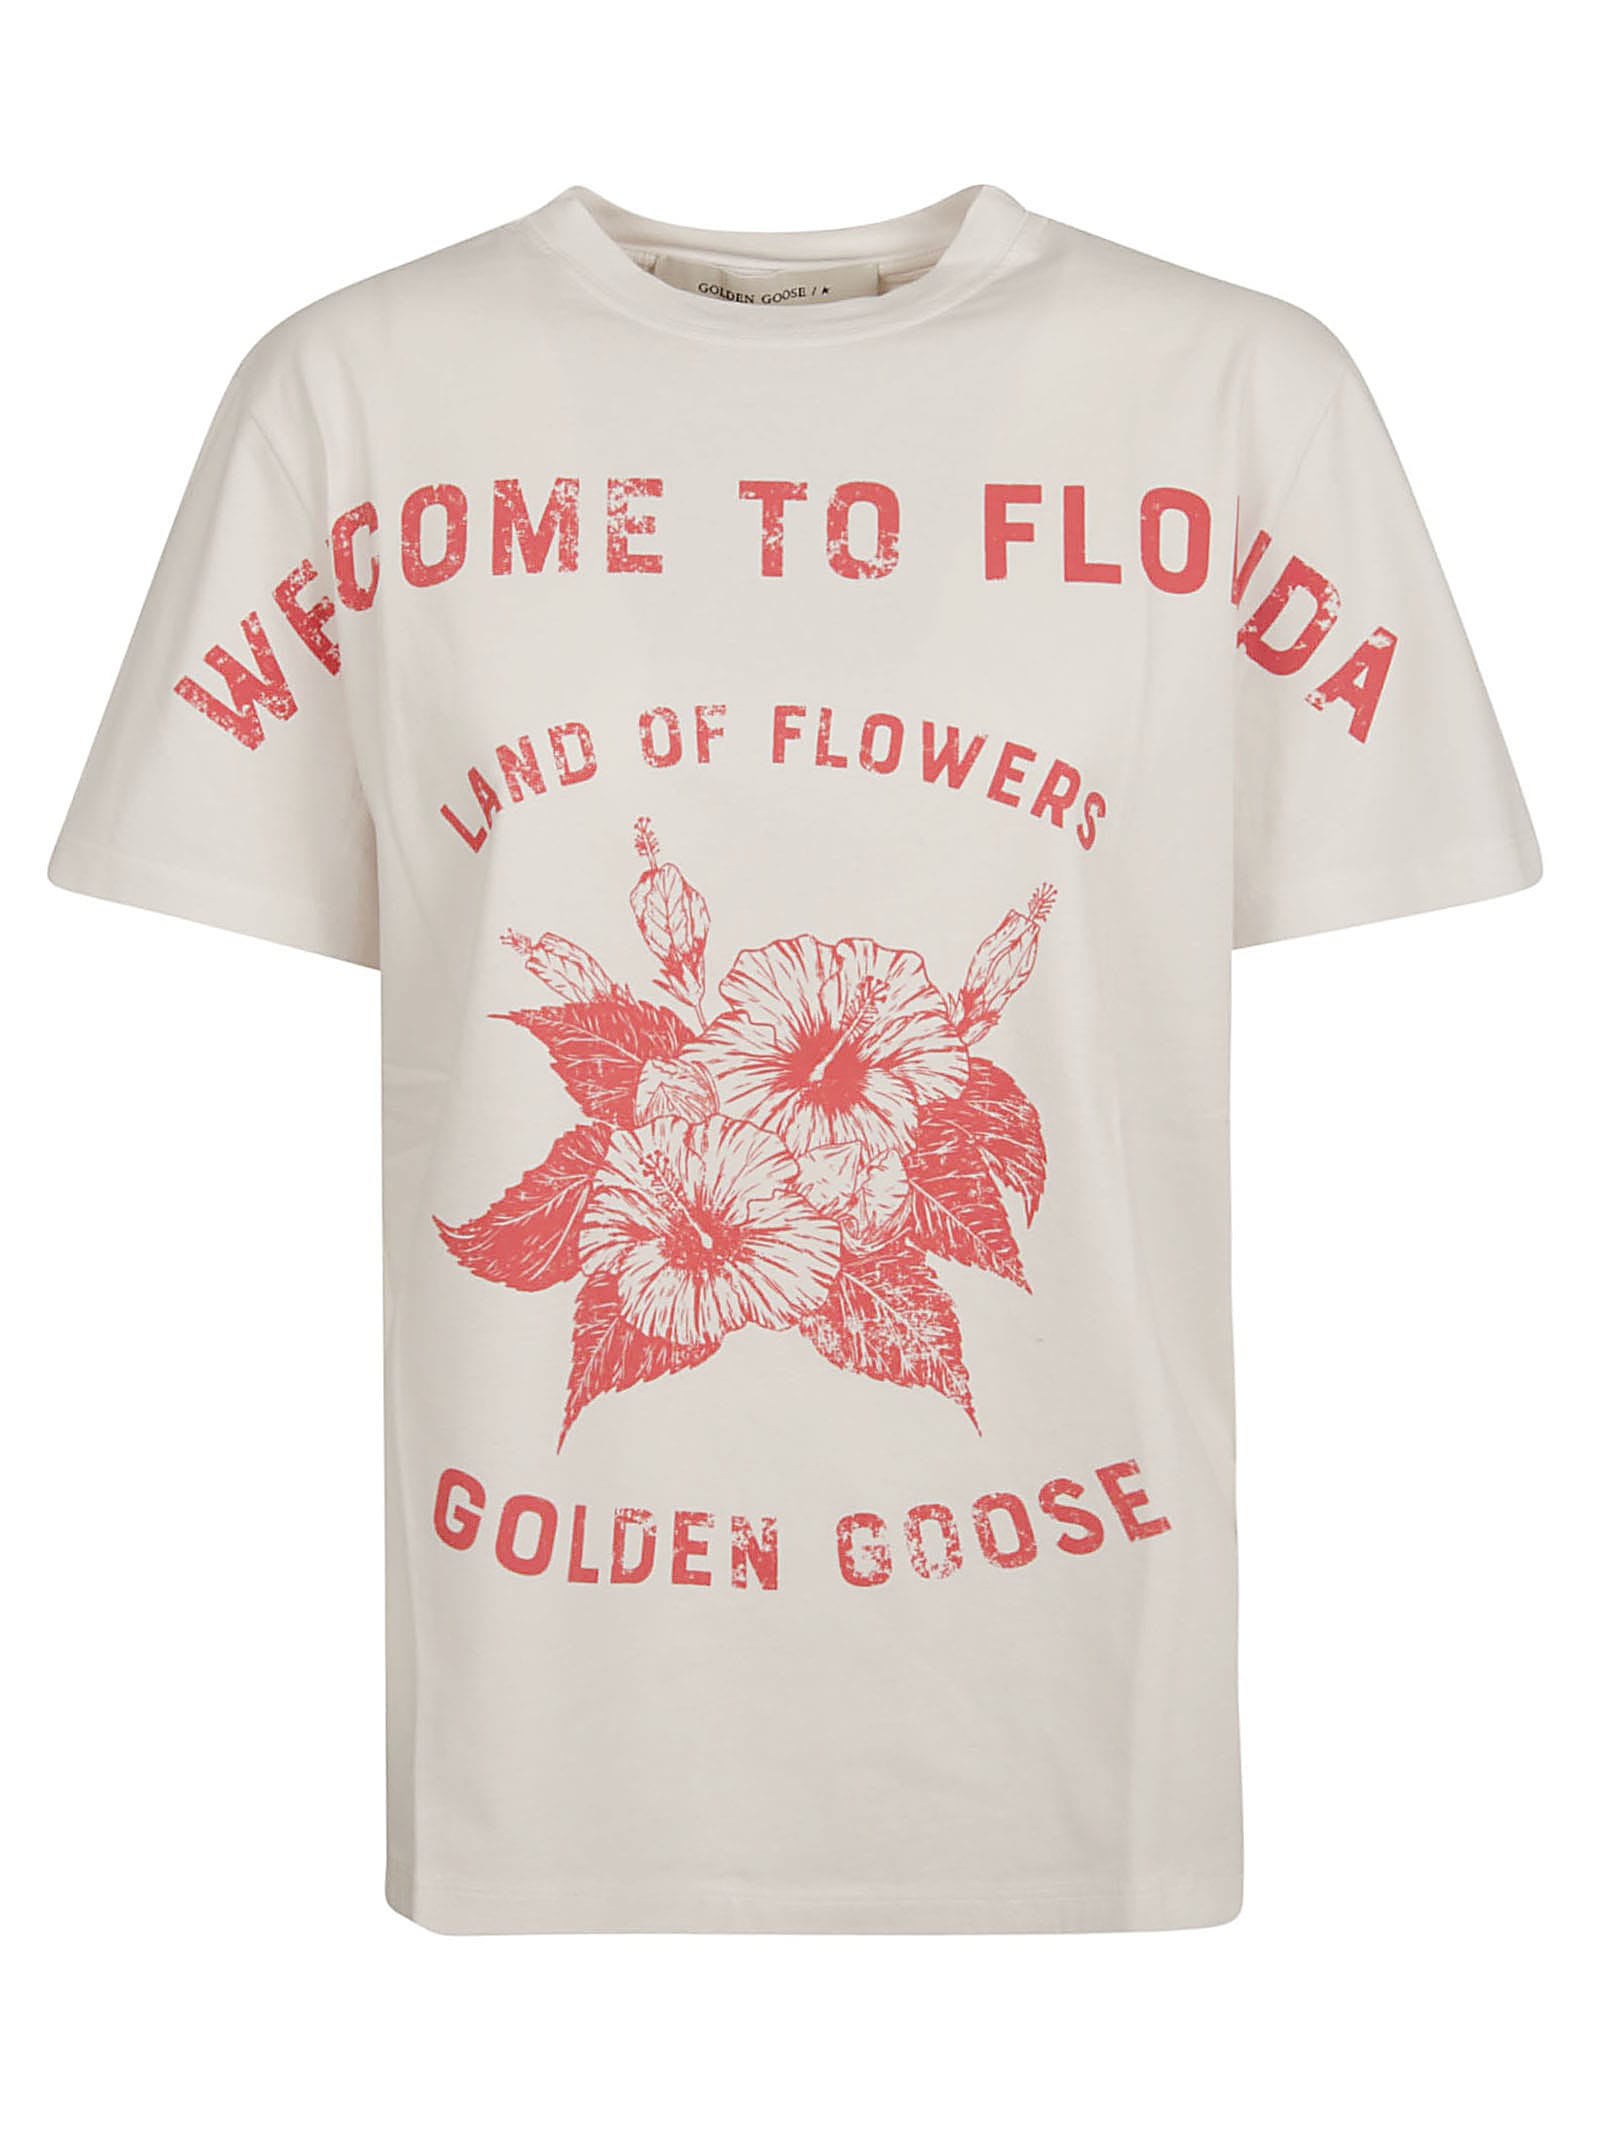 Golden Goose Welcome To Florida T-shirt